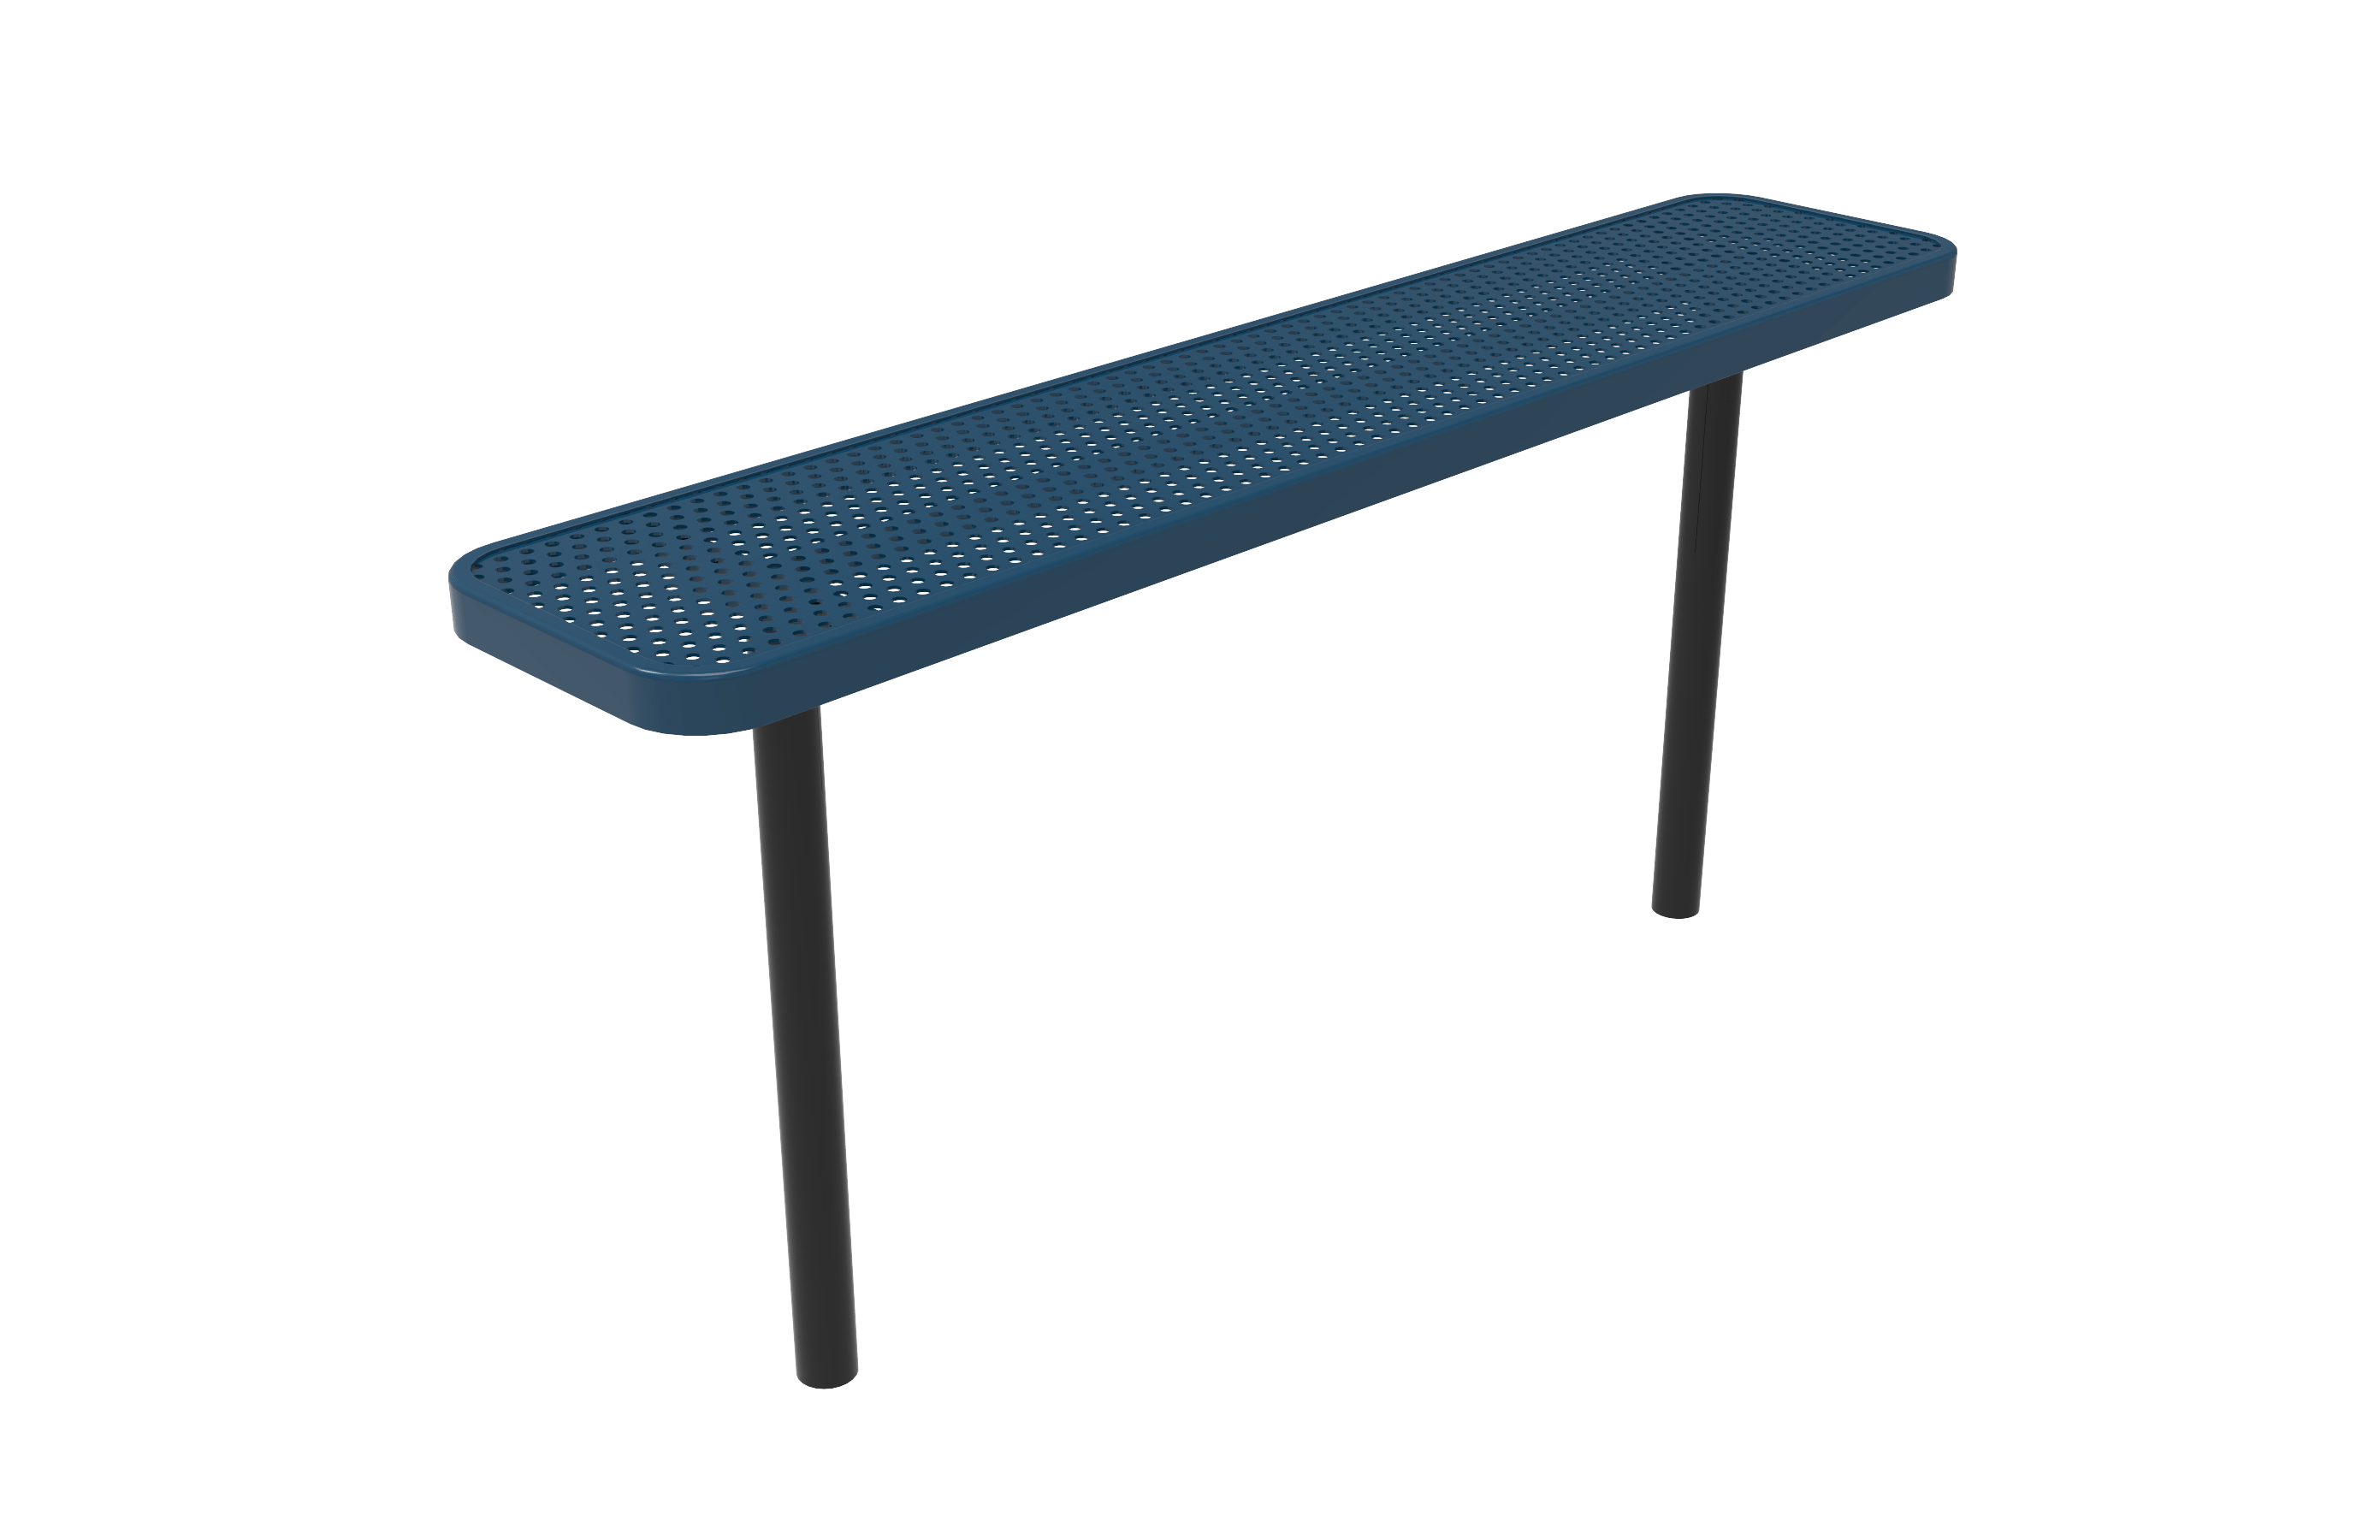 6′ Players Bench Without Back-Punched
BPY06-D-34-000
Industry Standard Finish
$549.00
BPY06-B-34-000
Advantage Premium Finish
$659.00
